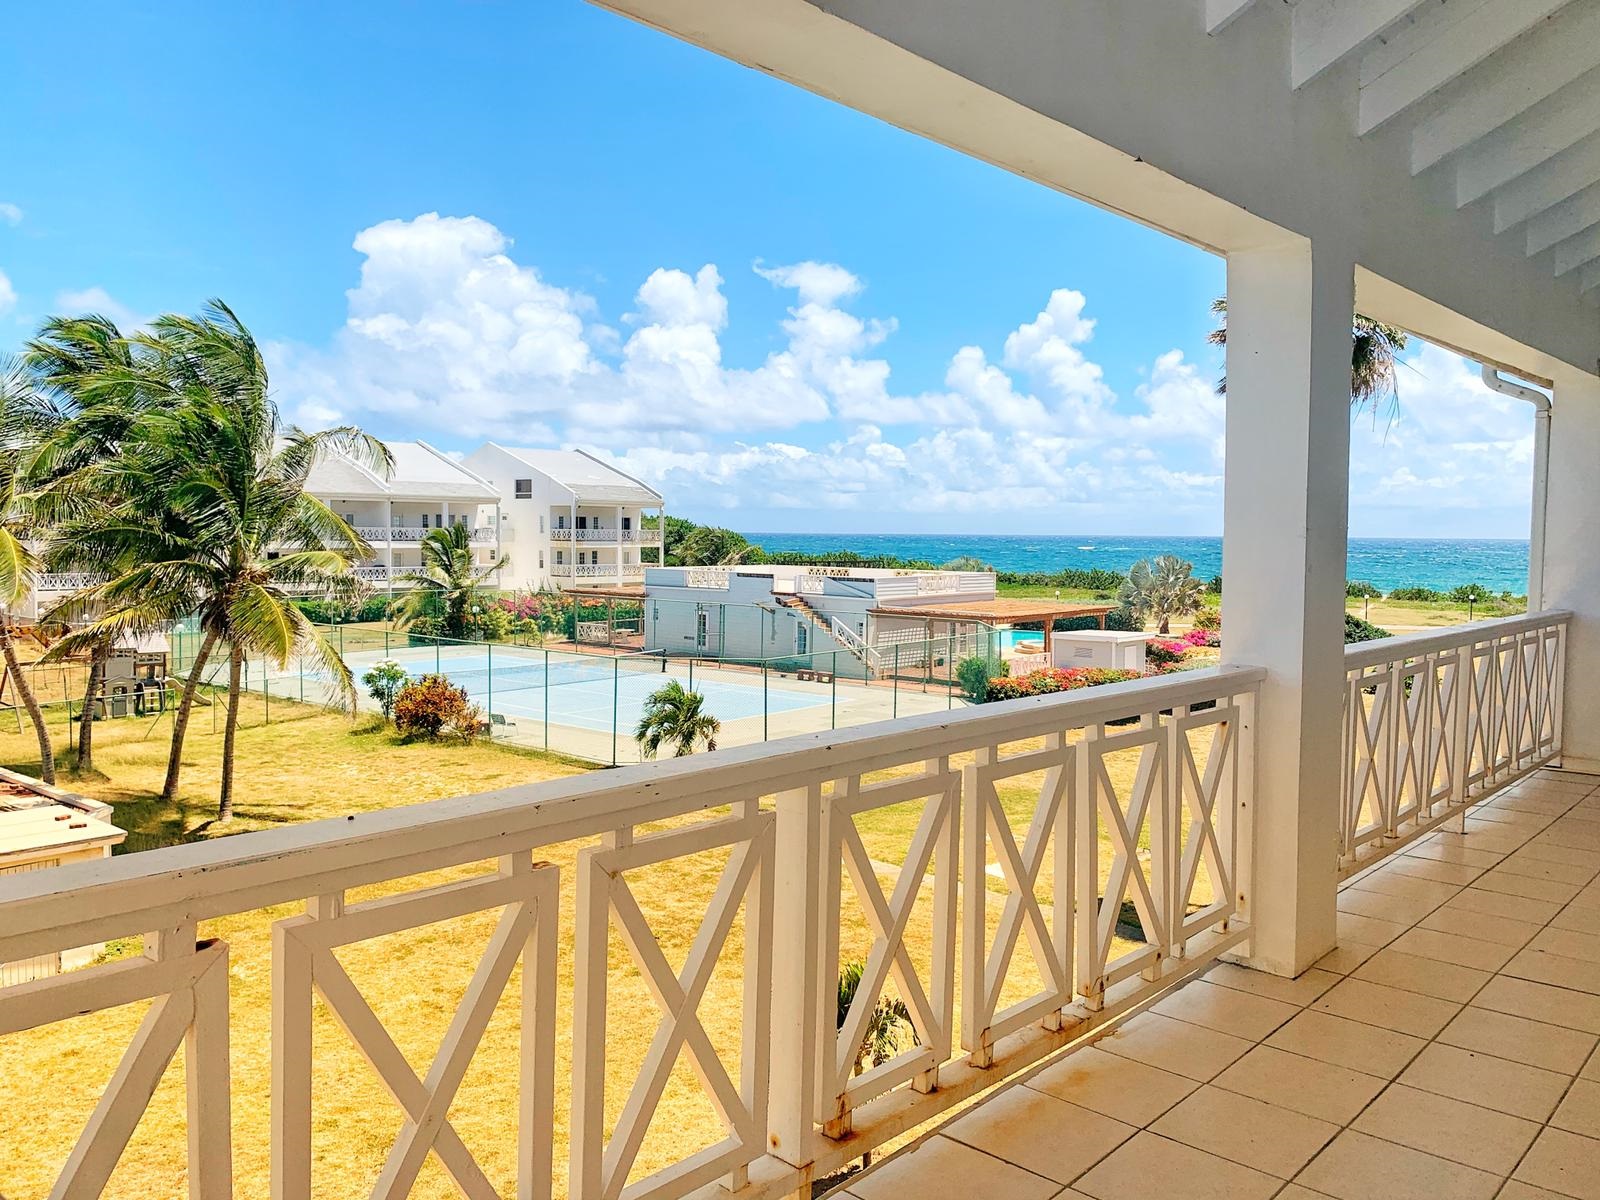 Balcony Views in the in the St. Christopher Club Newly Furnished 3 Bed 3 Bath Penthouse! Student Rentals